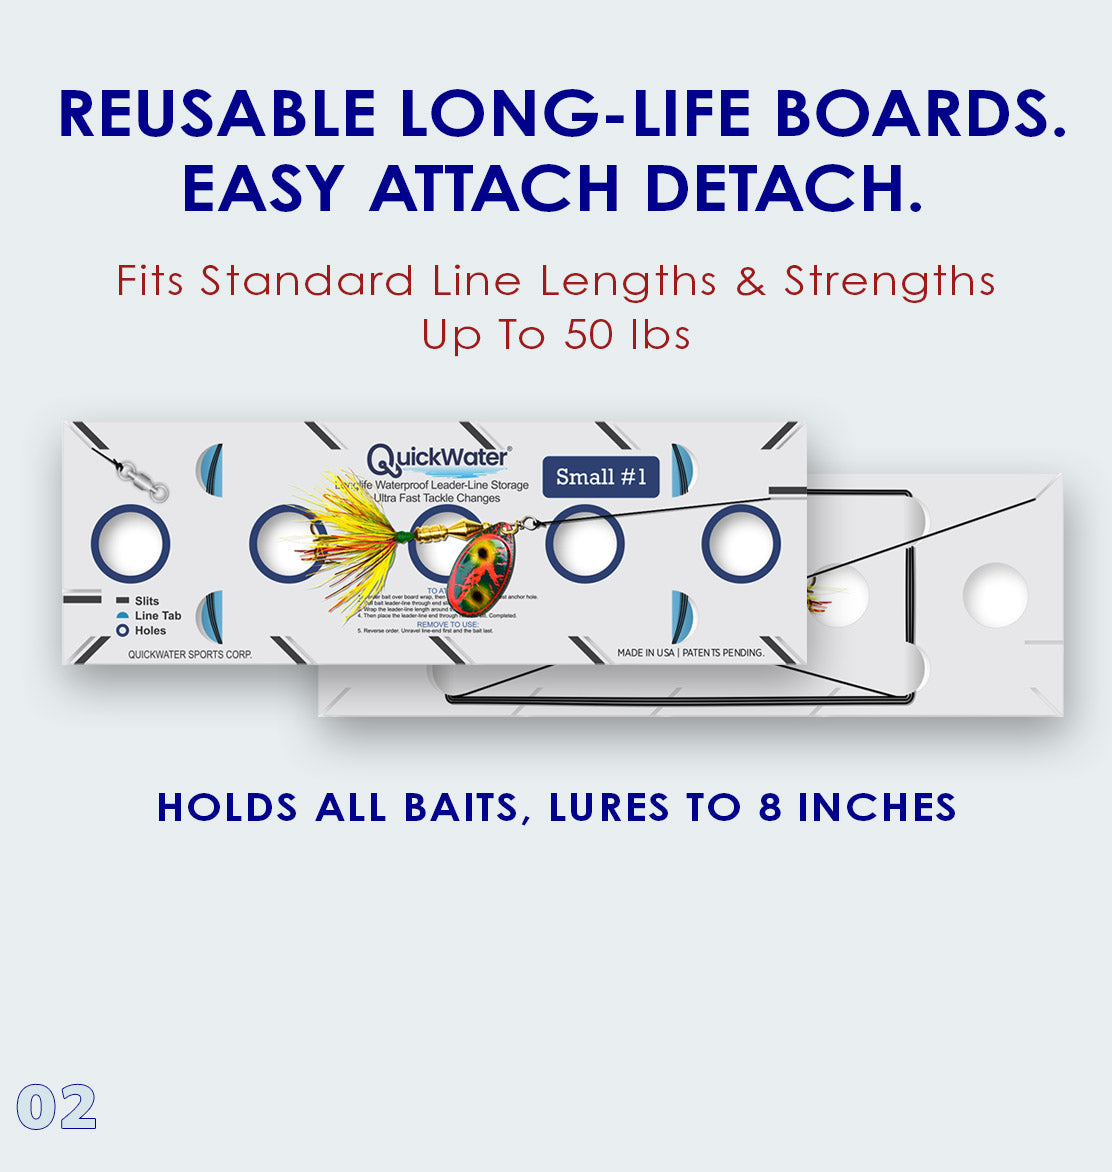 Slide 2: Reusable Long-Life Boards. Easy Attach Detach. Fits Standard Line Lengths & Strengths up to 50lbs. • Holds all baits, lures to 8 inches